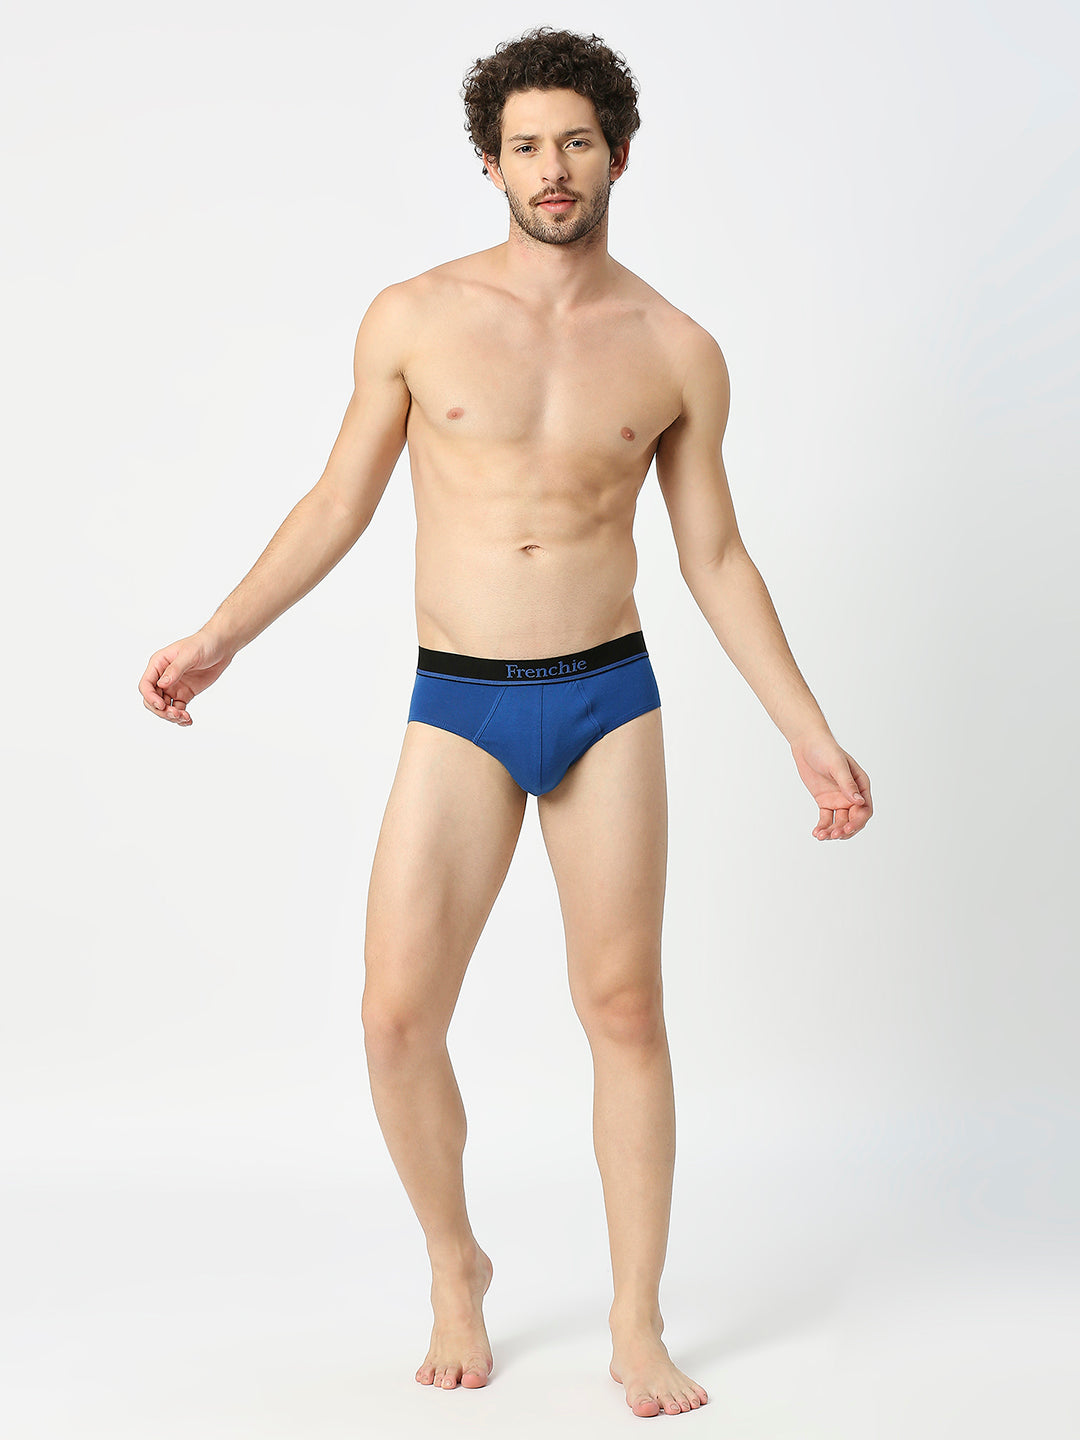 Frenchie Briefs for Men Essentials -Assorted Colours